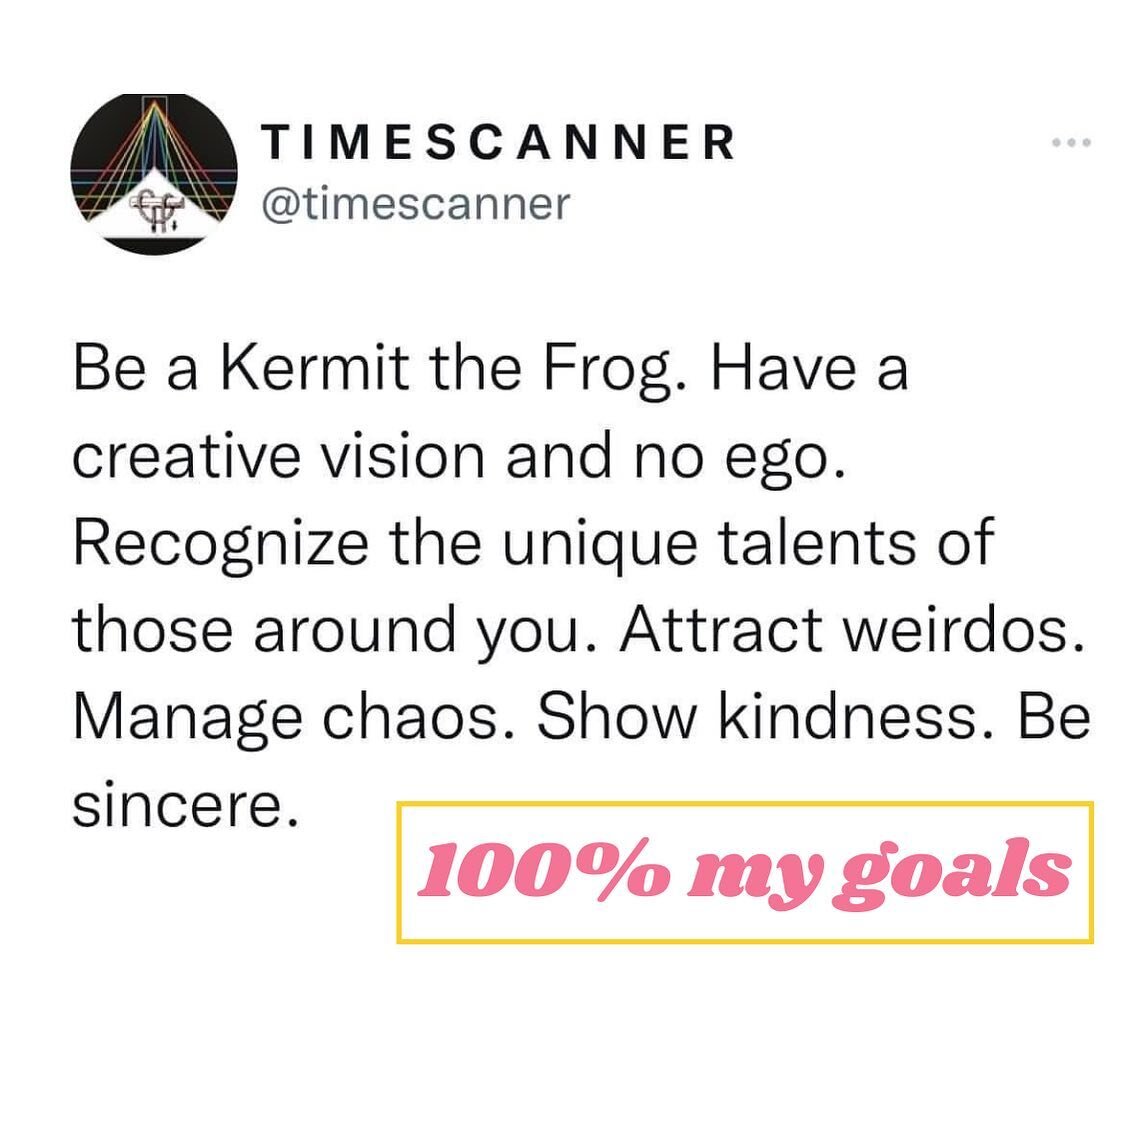 I guess I&rsquo;m Kermit! Or trying to be. WWKD? Please tell me when I am straying from the Kermit-y path, friends. 😁😁
.
.
.
#artist #creative #artistsoninstagram #artistsupport #artistsofinstagram #artrepreneur #artistlife #makers #creativeminds